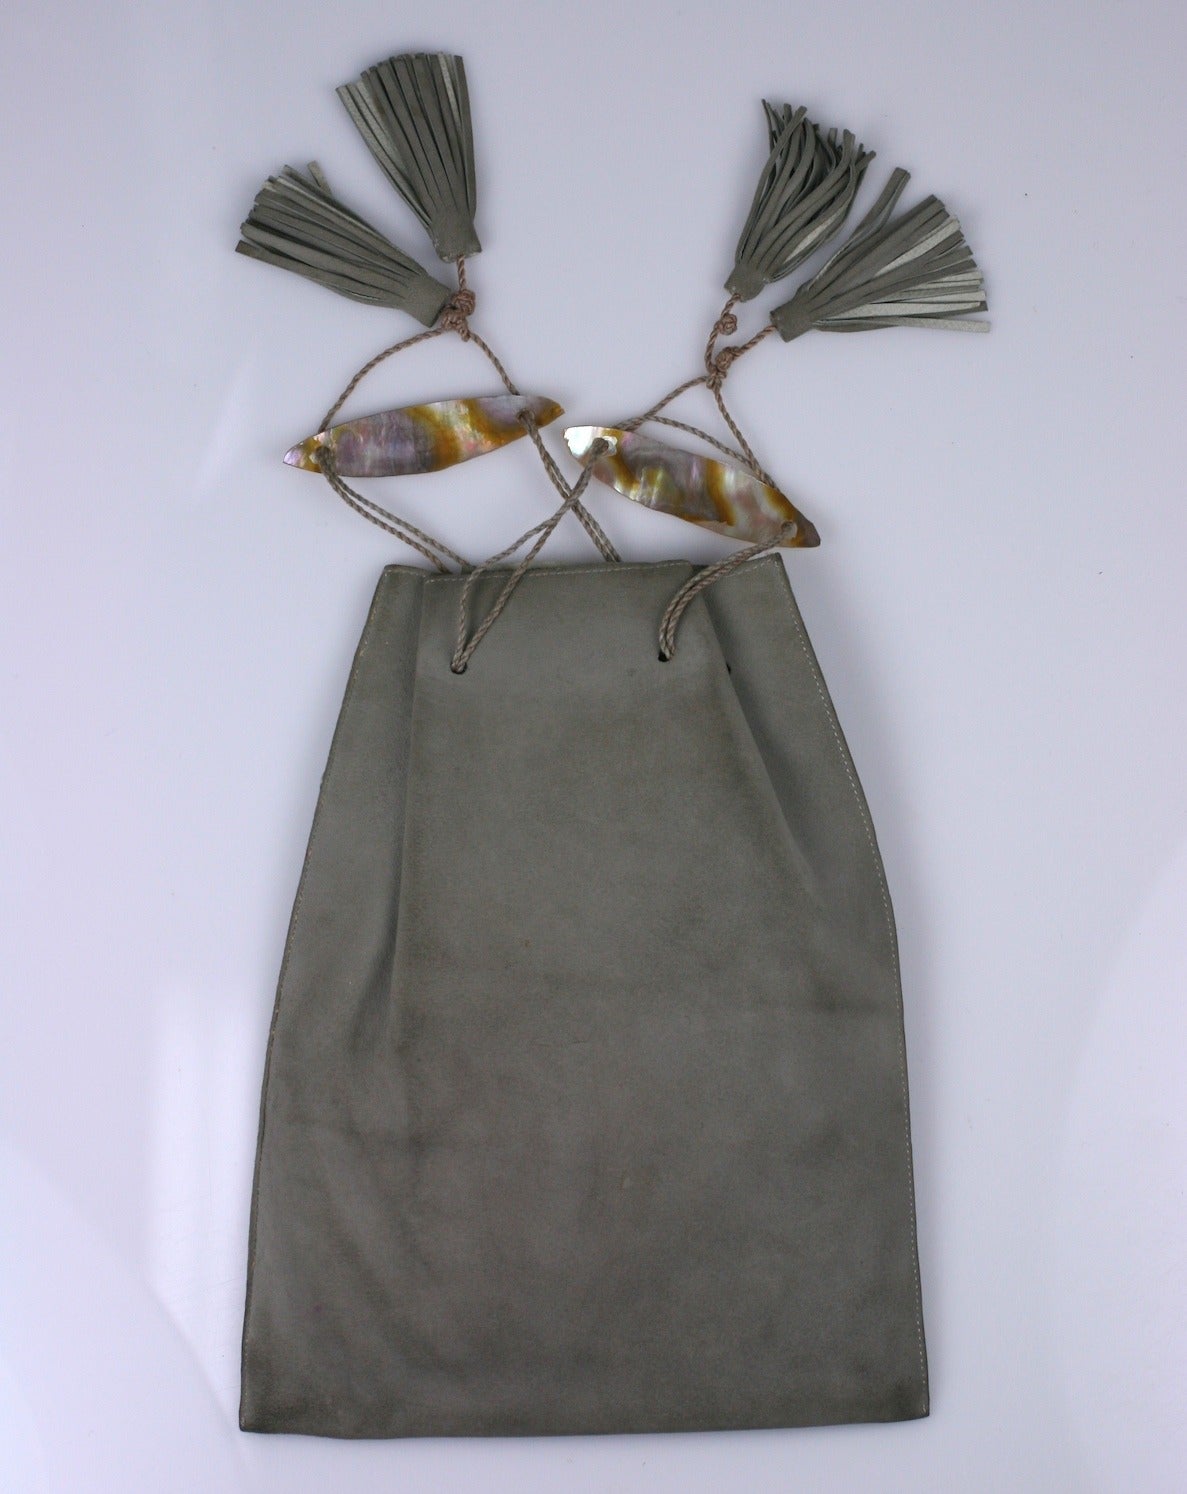 Wonderful Arts and Crafts Dragonfly Pouch in dove gray doe skin with mother of pearl dragonfly inlays. Additional detailing is added through the tooling of the suede in the corners of the pouch.
Typical drawstring closure with the addition of